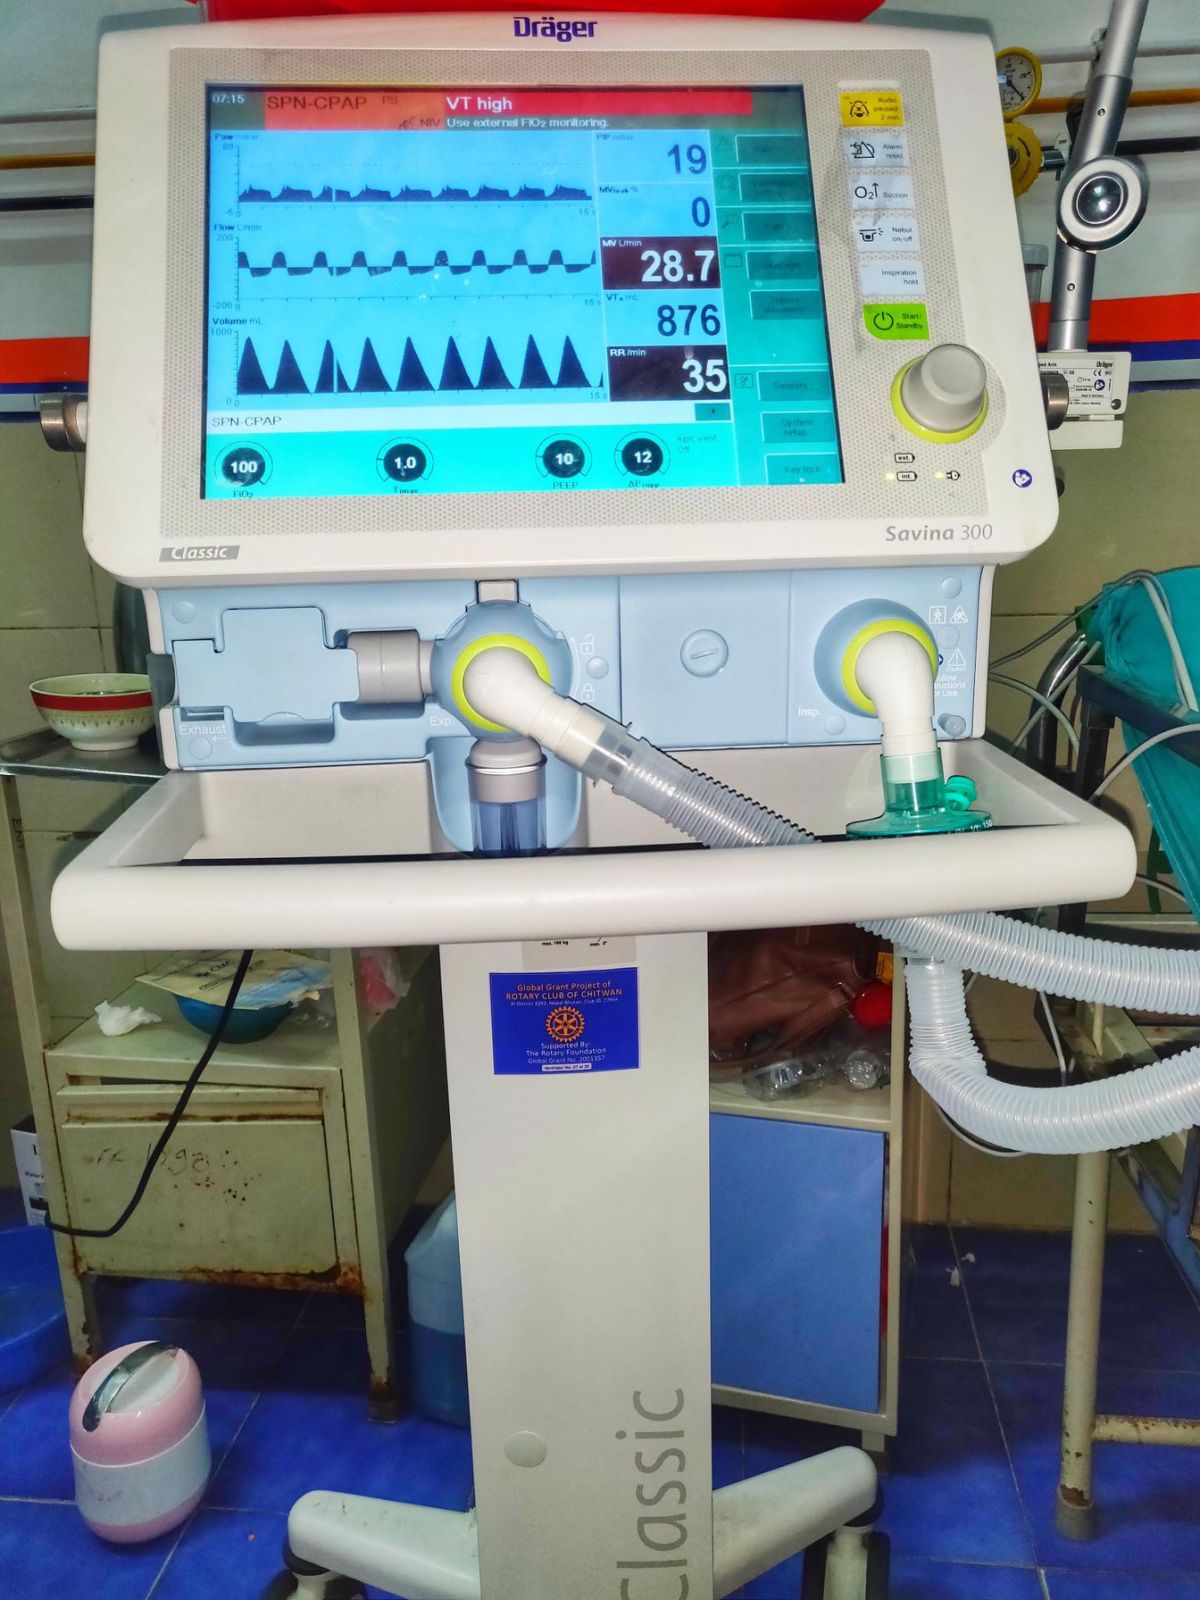 You are currently viewing Covid-19 Intensive Care Unit Ventilator Project